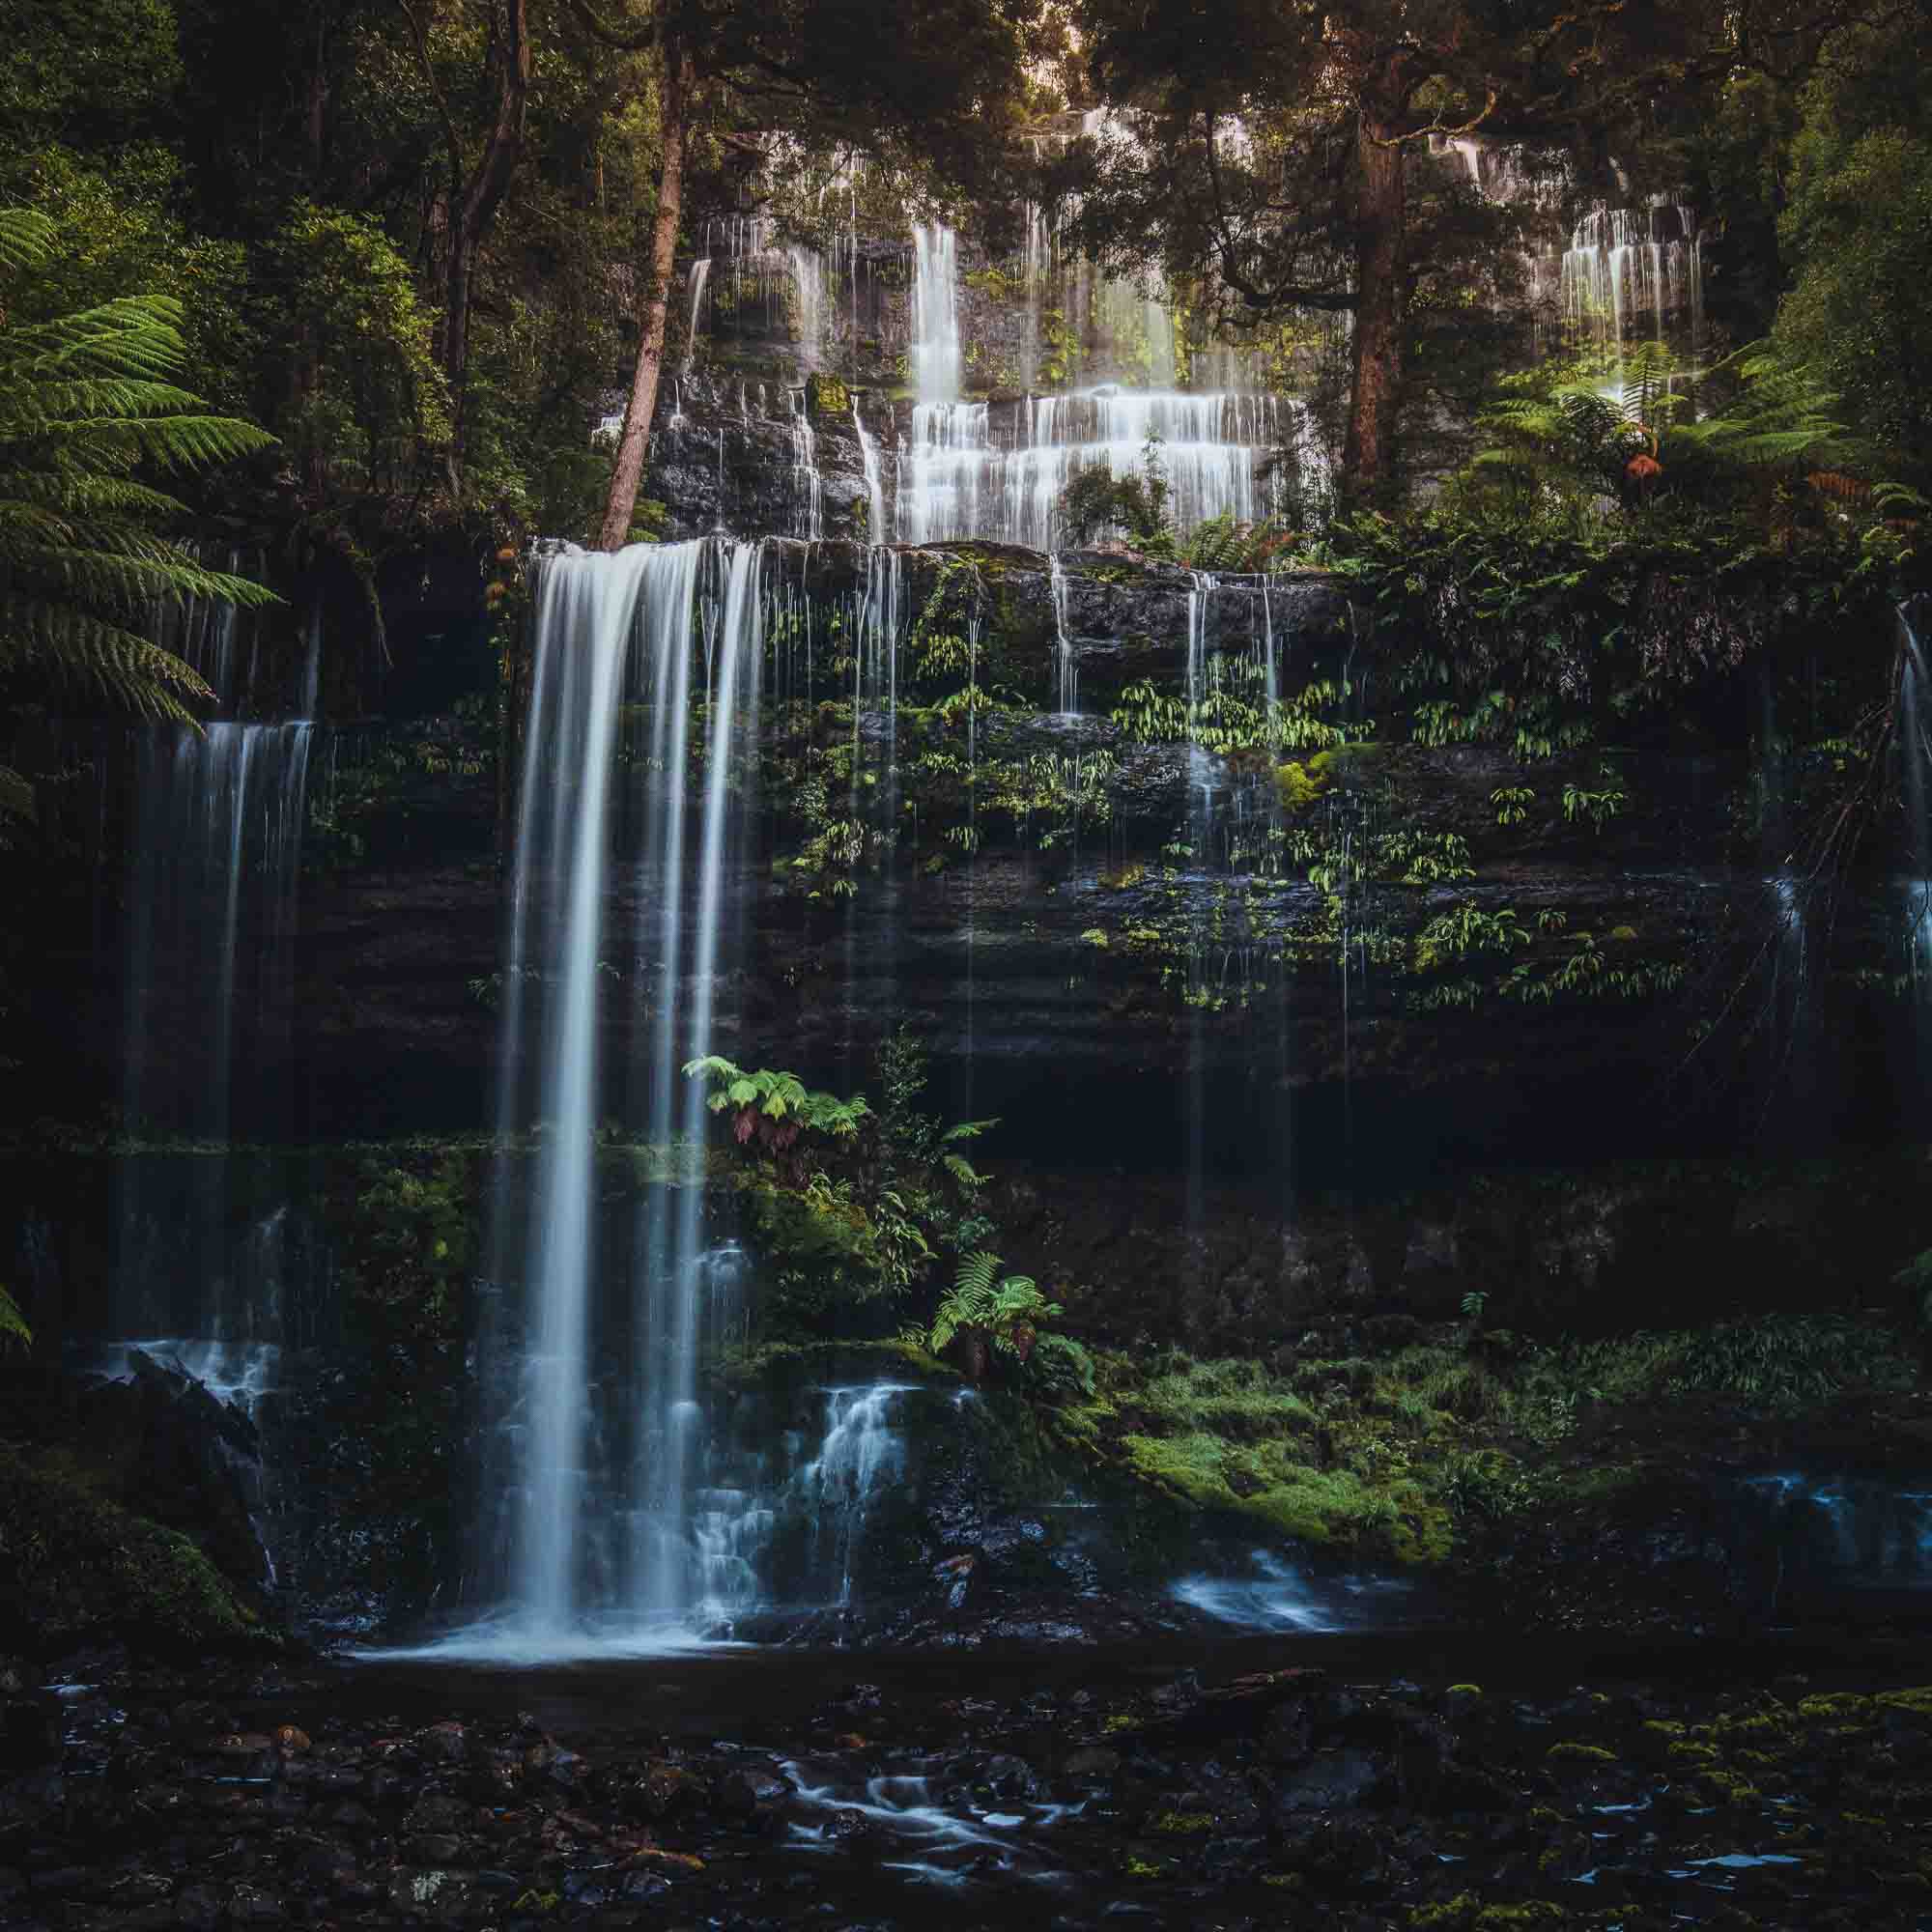 Long exposure photo of the multi-tiered Russell Falls in Tasmania, surrounded by a lush, fern-draped forest.